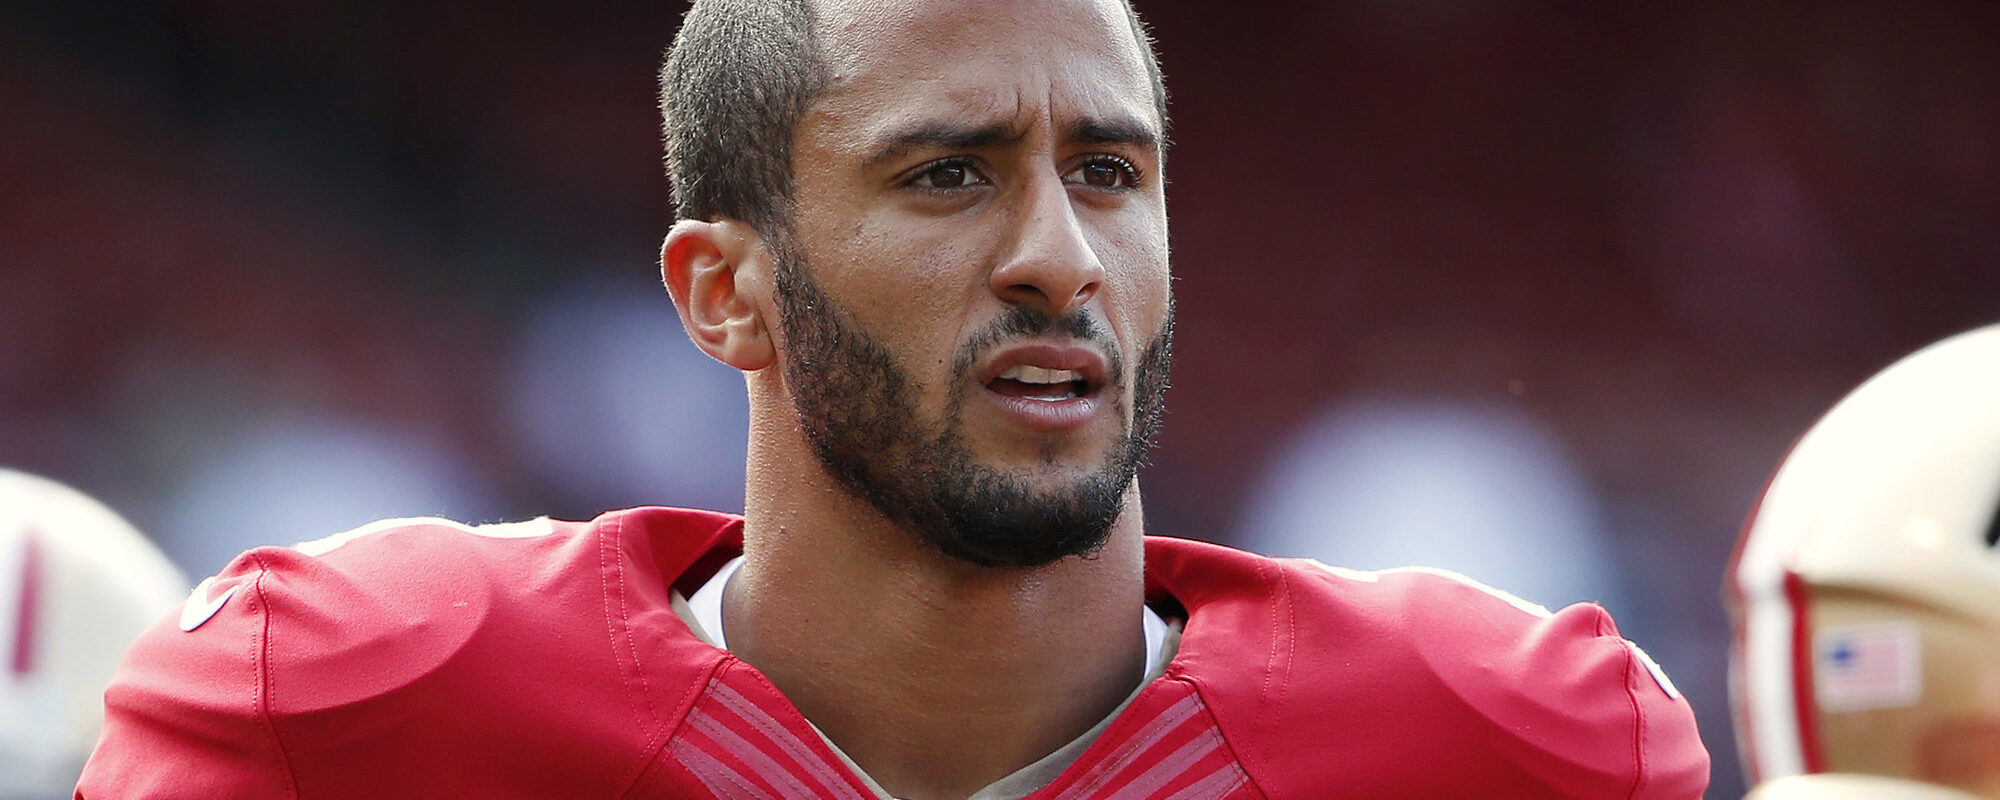 What Does Colin Kaepernick’s Free Agency Say About Us?